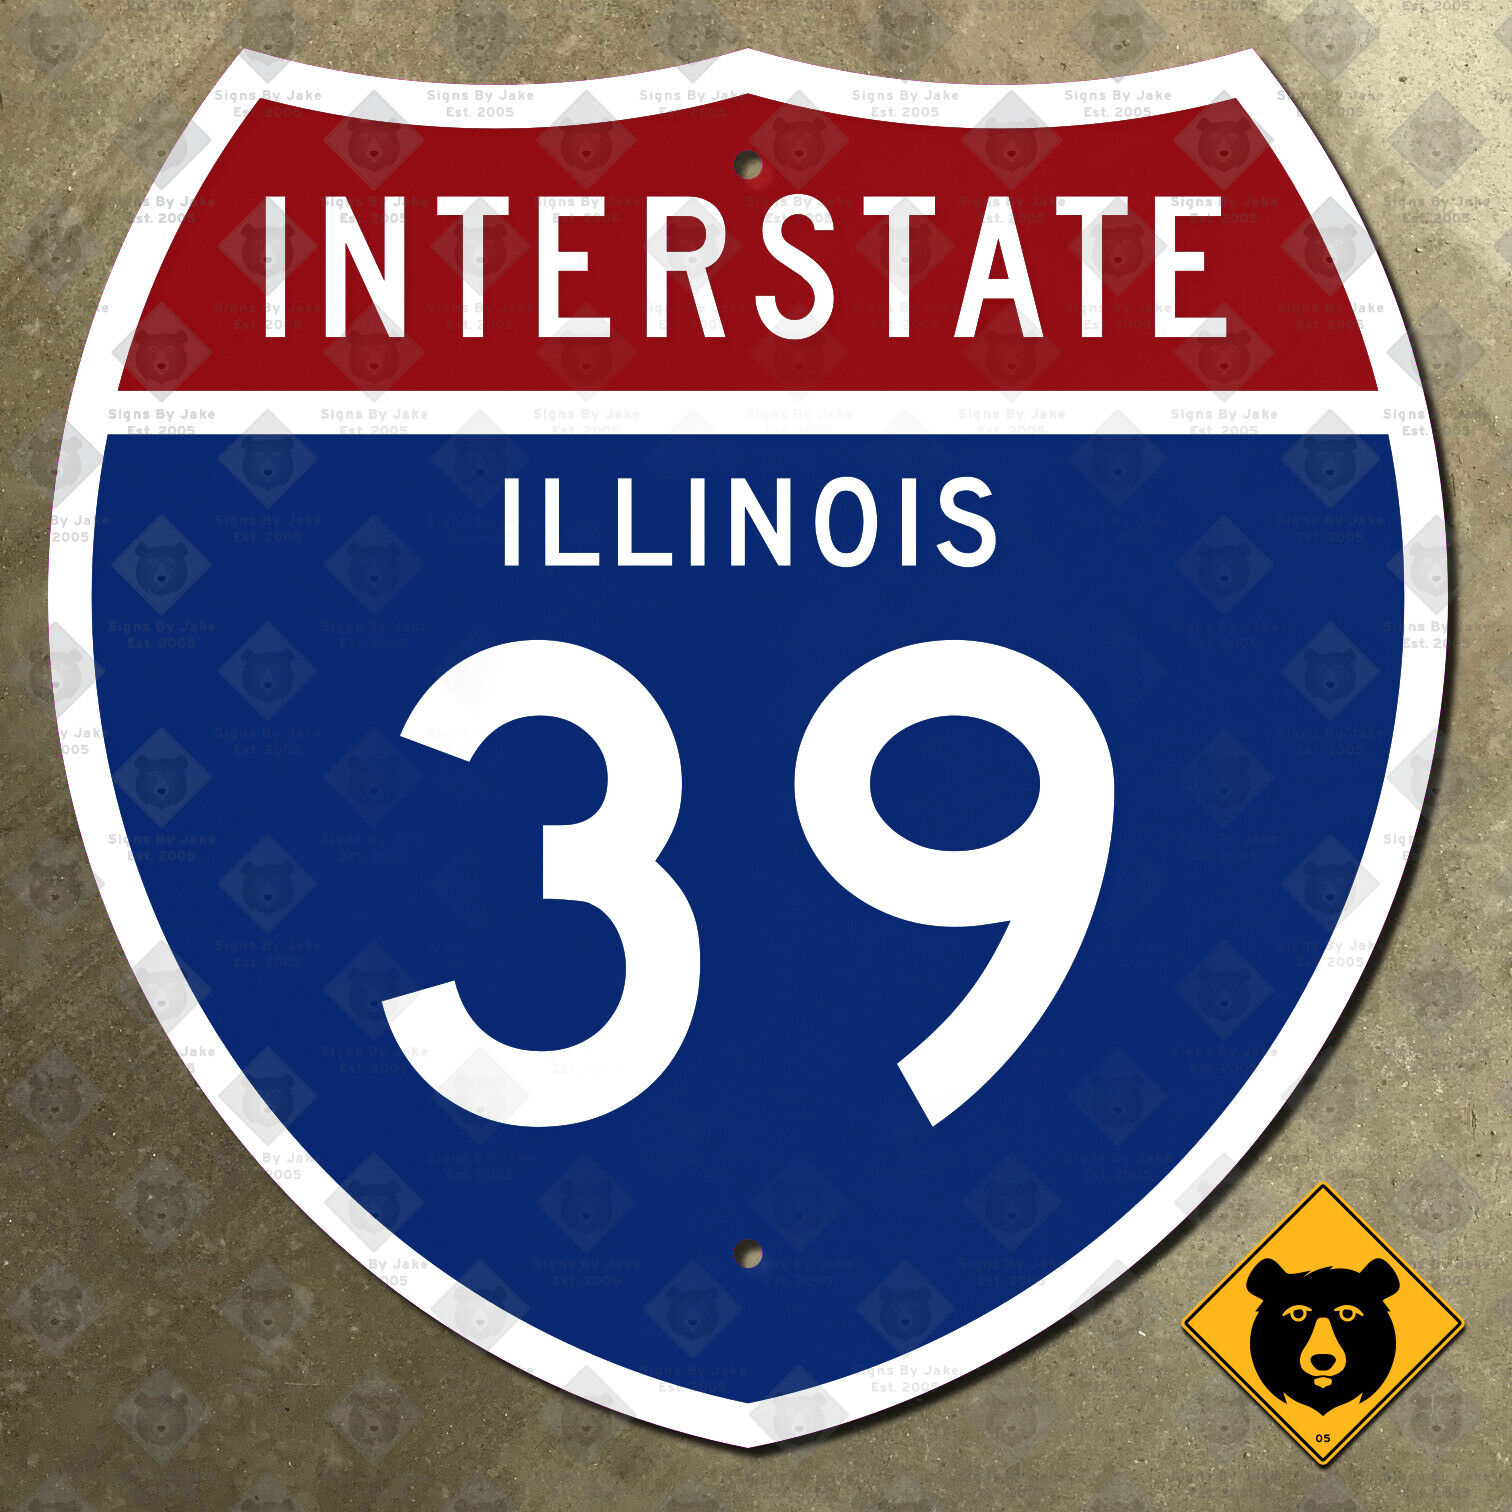 Illinois Interstate route 39 highway road sign Rockford Normal 1961 24x24